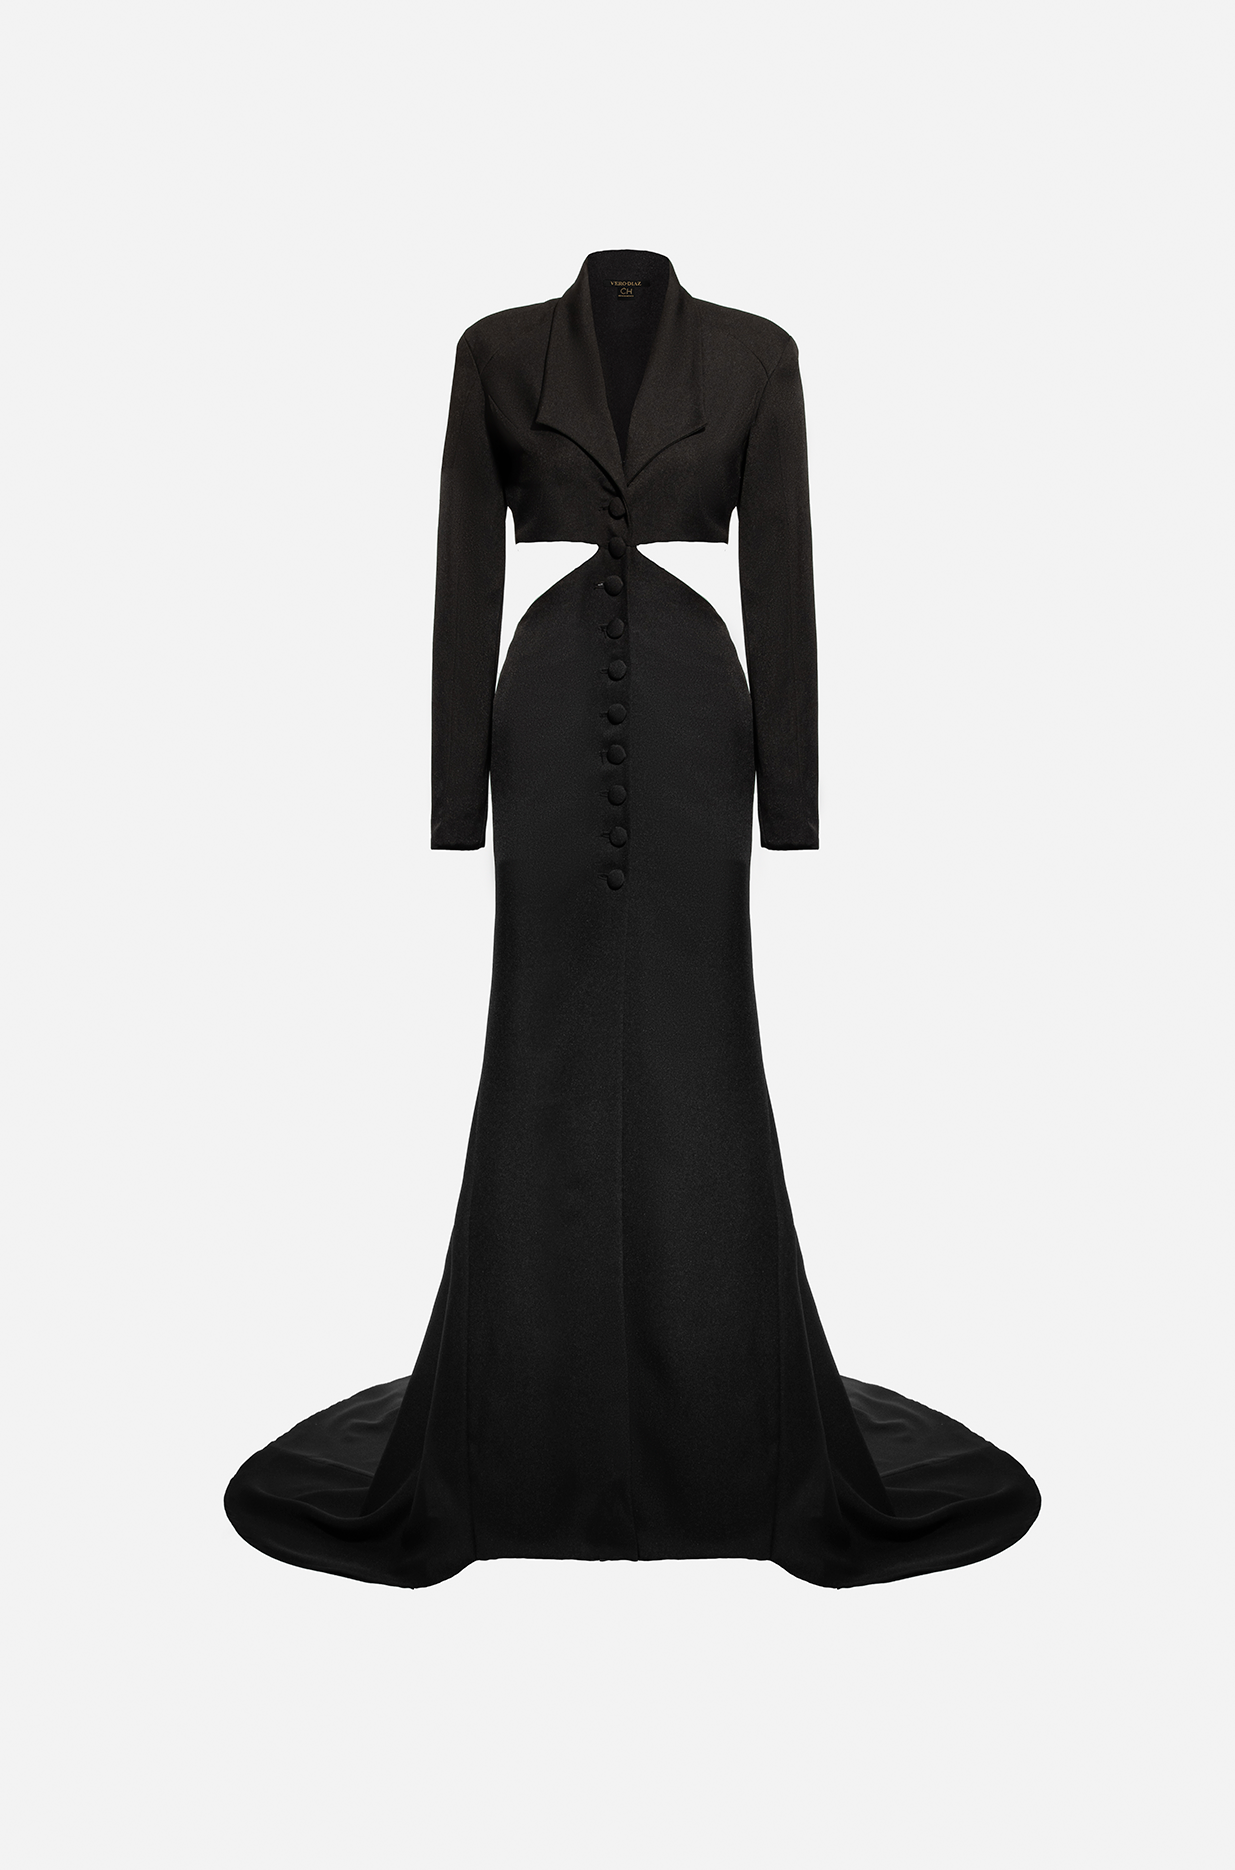 THE MUSE GOWN IN BLACK